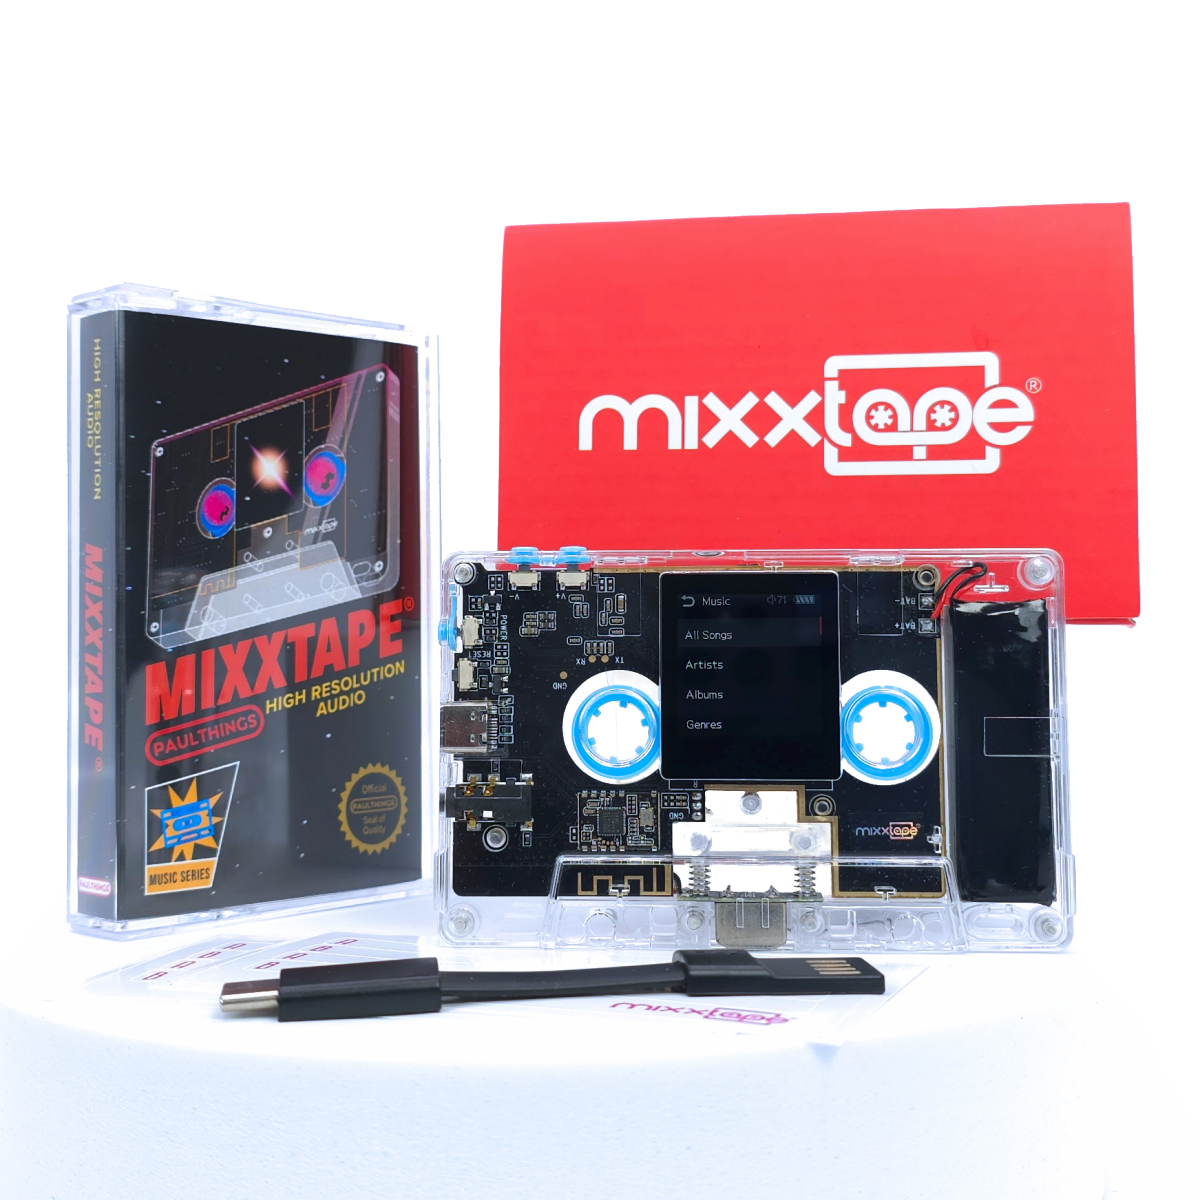 Mixxtape: A reinvented cassette tape, now available on a flash sale for $45. Limited time!